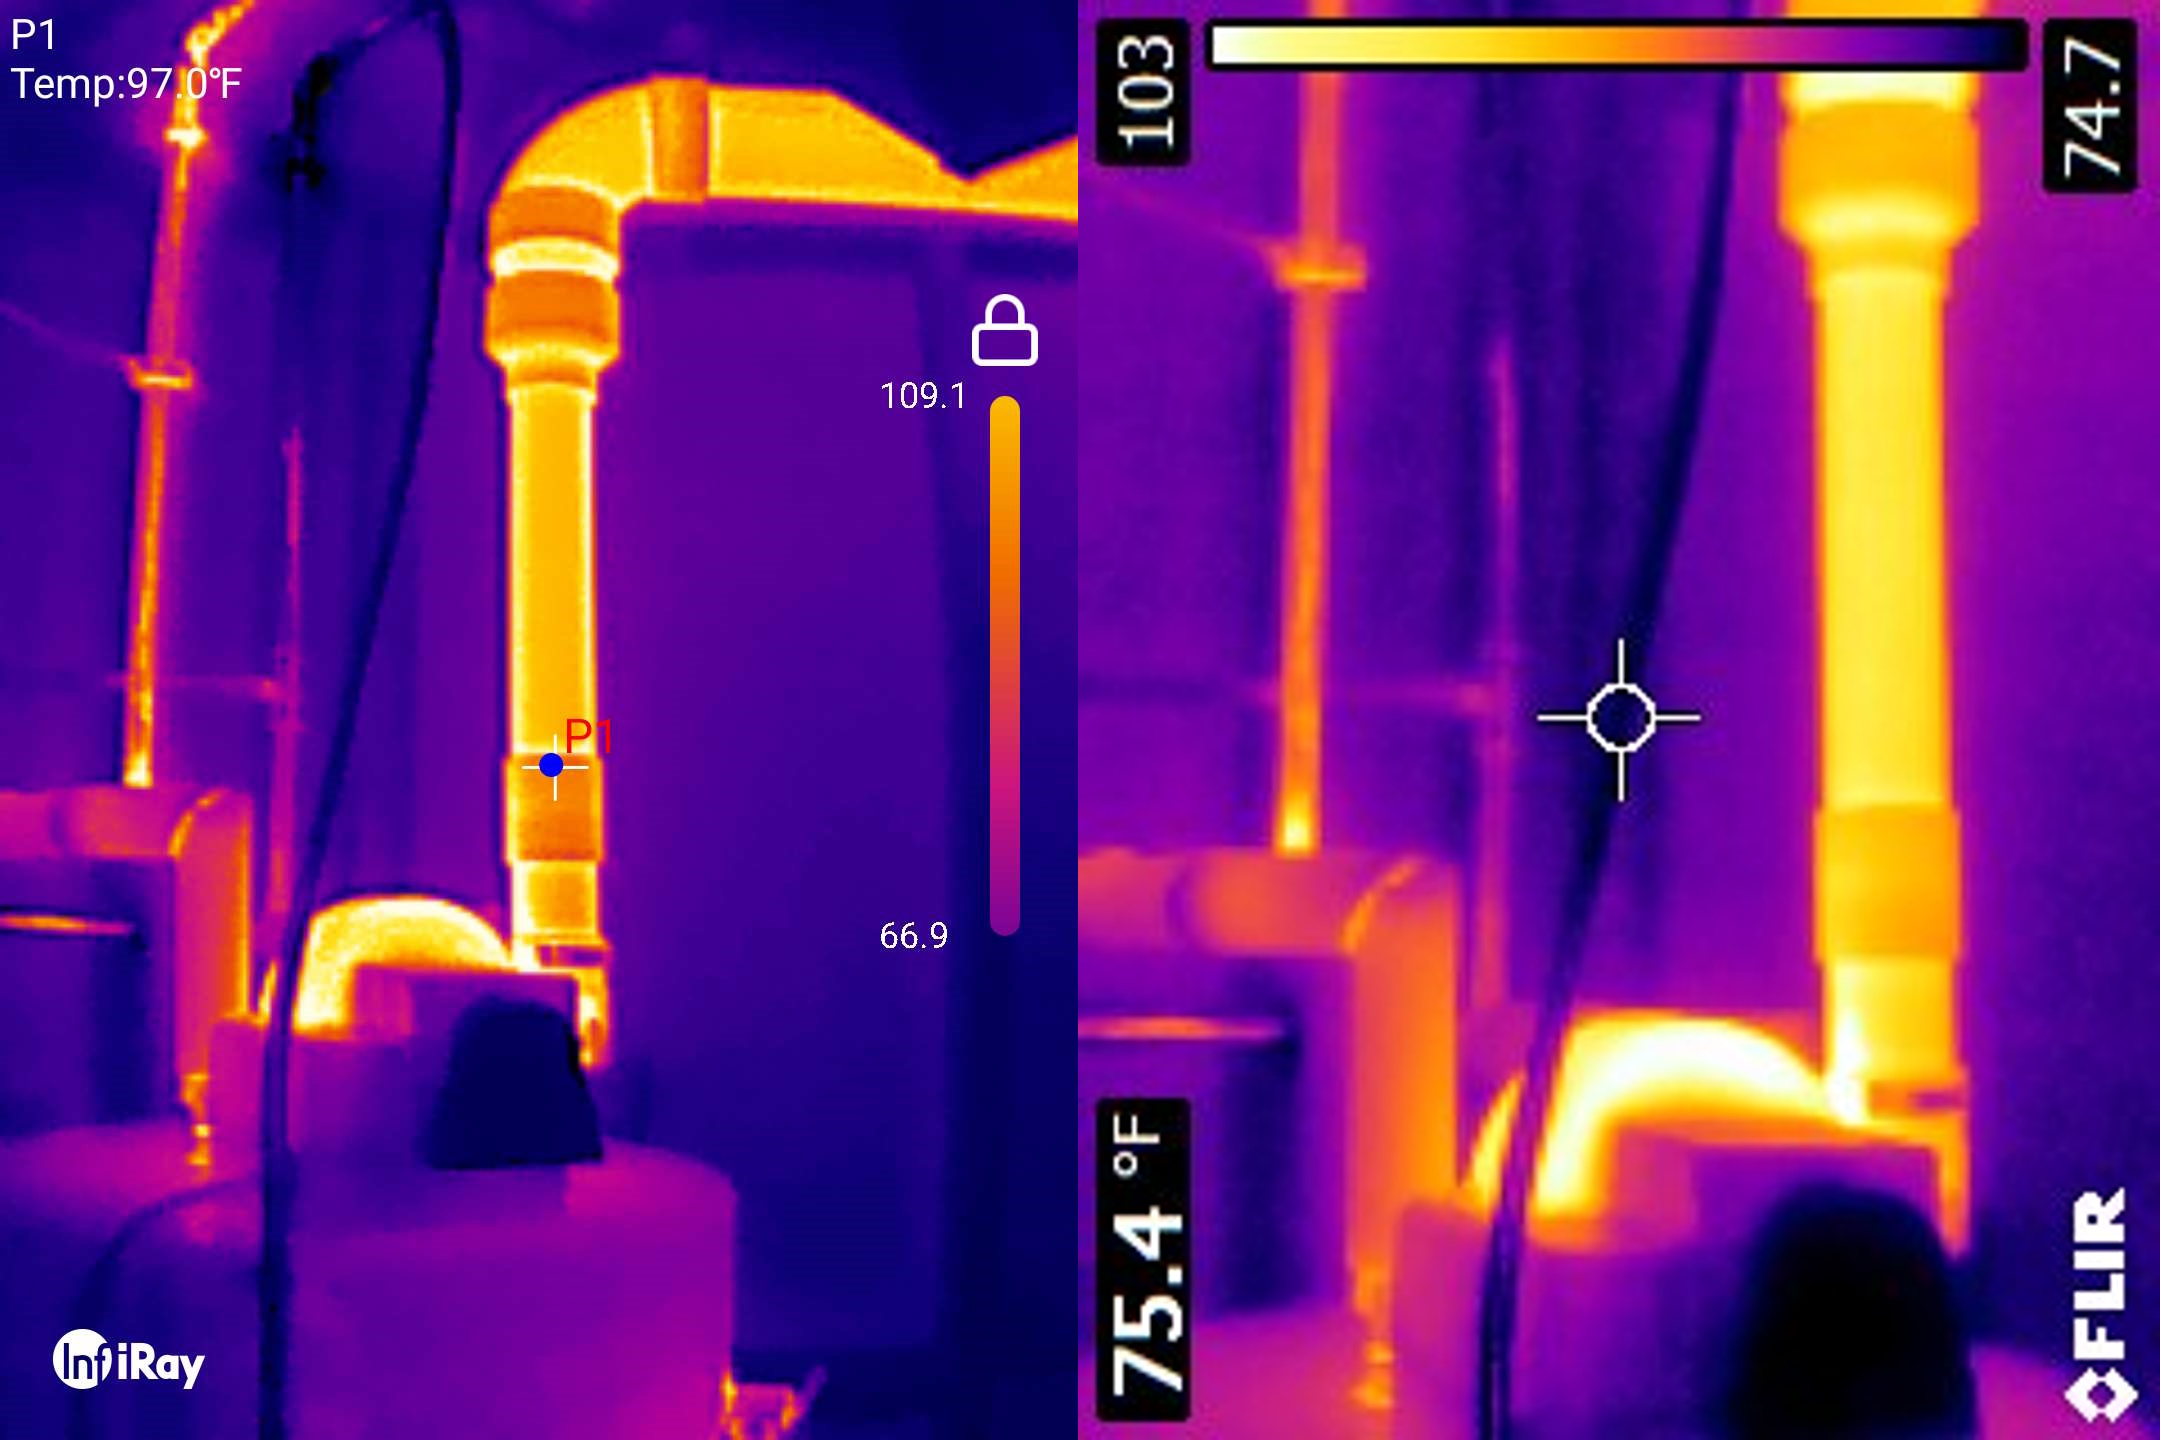 InfiRay P2 Pro: A home inspector's review of a new smartphone